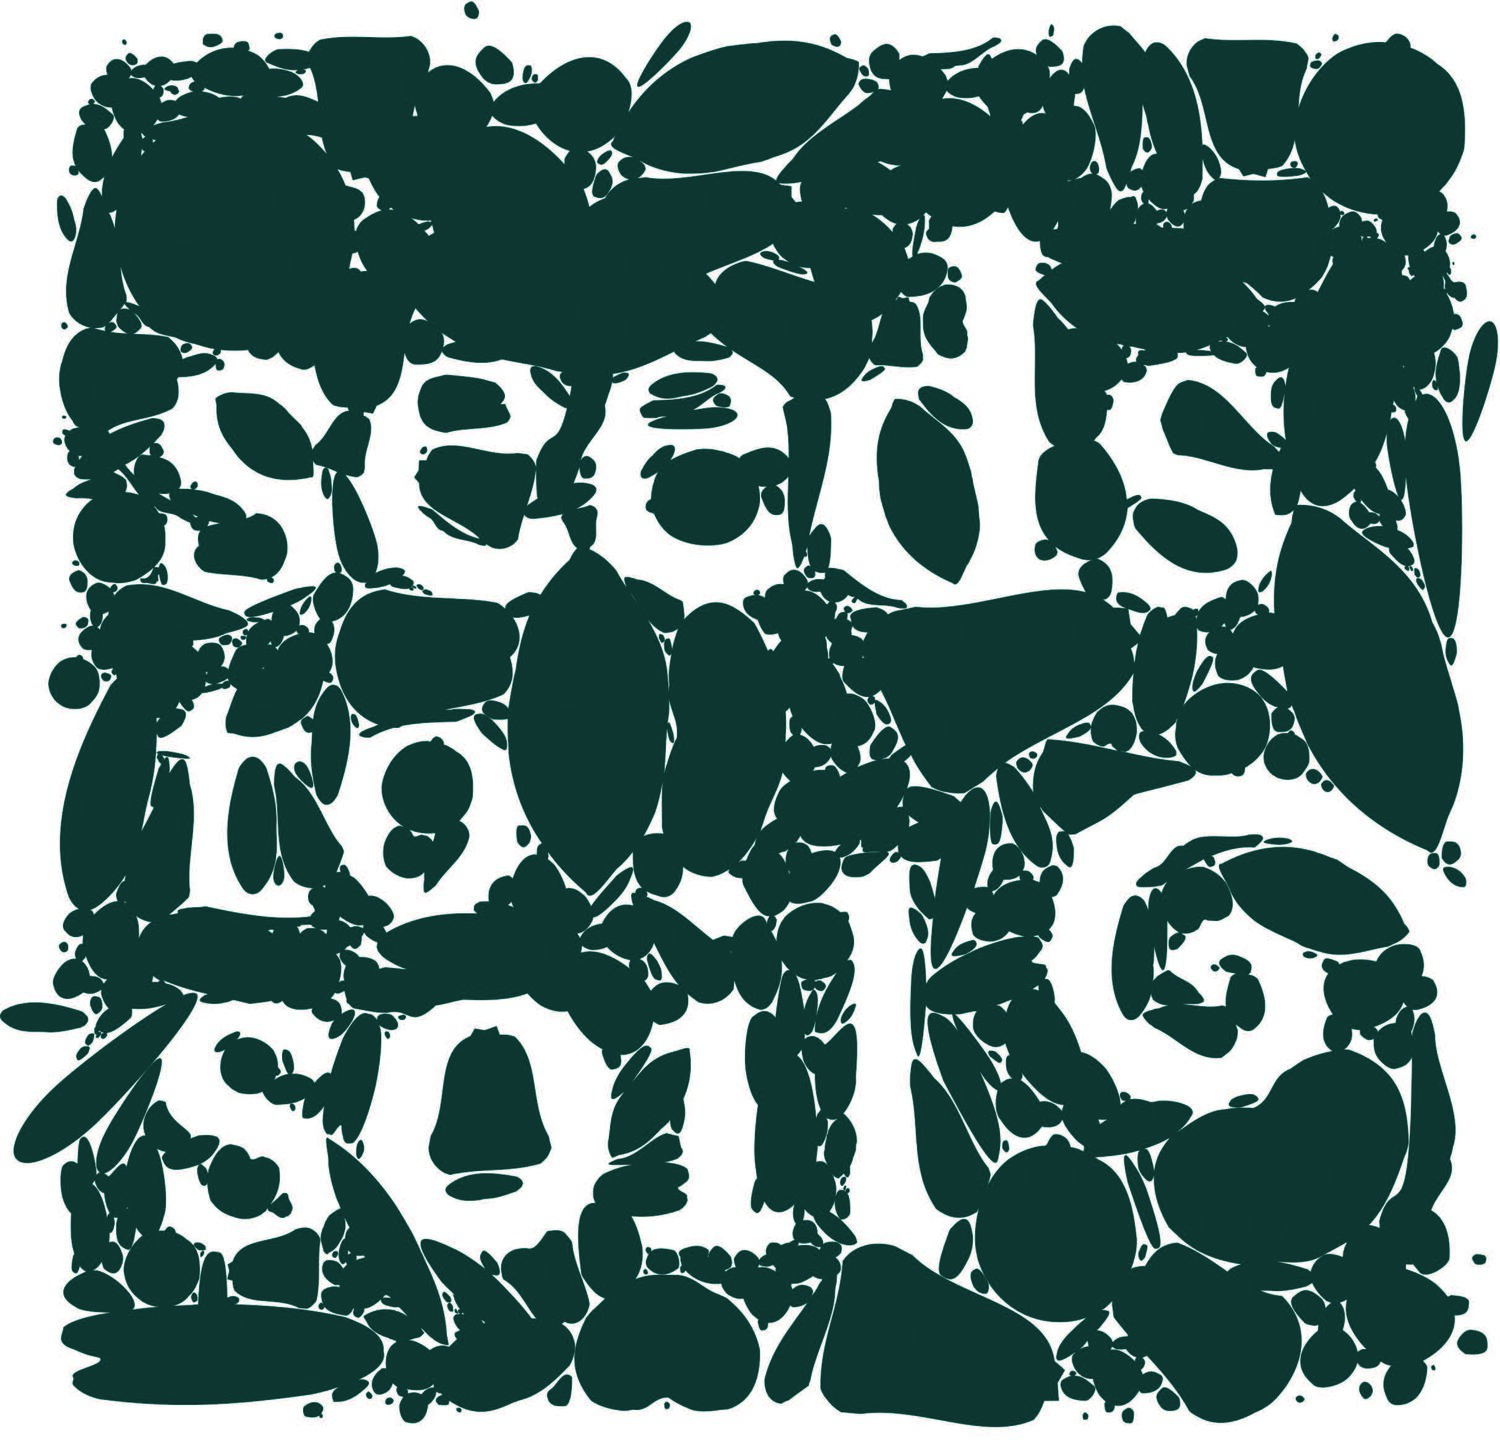 Seeds to Soil